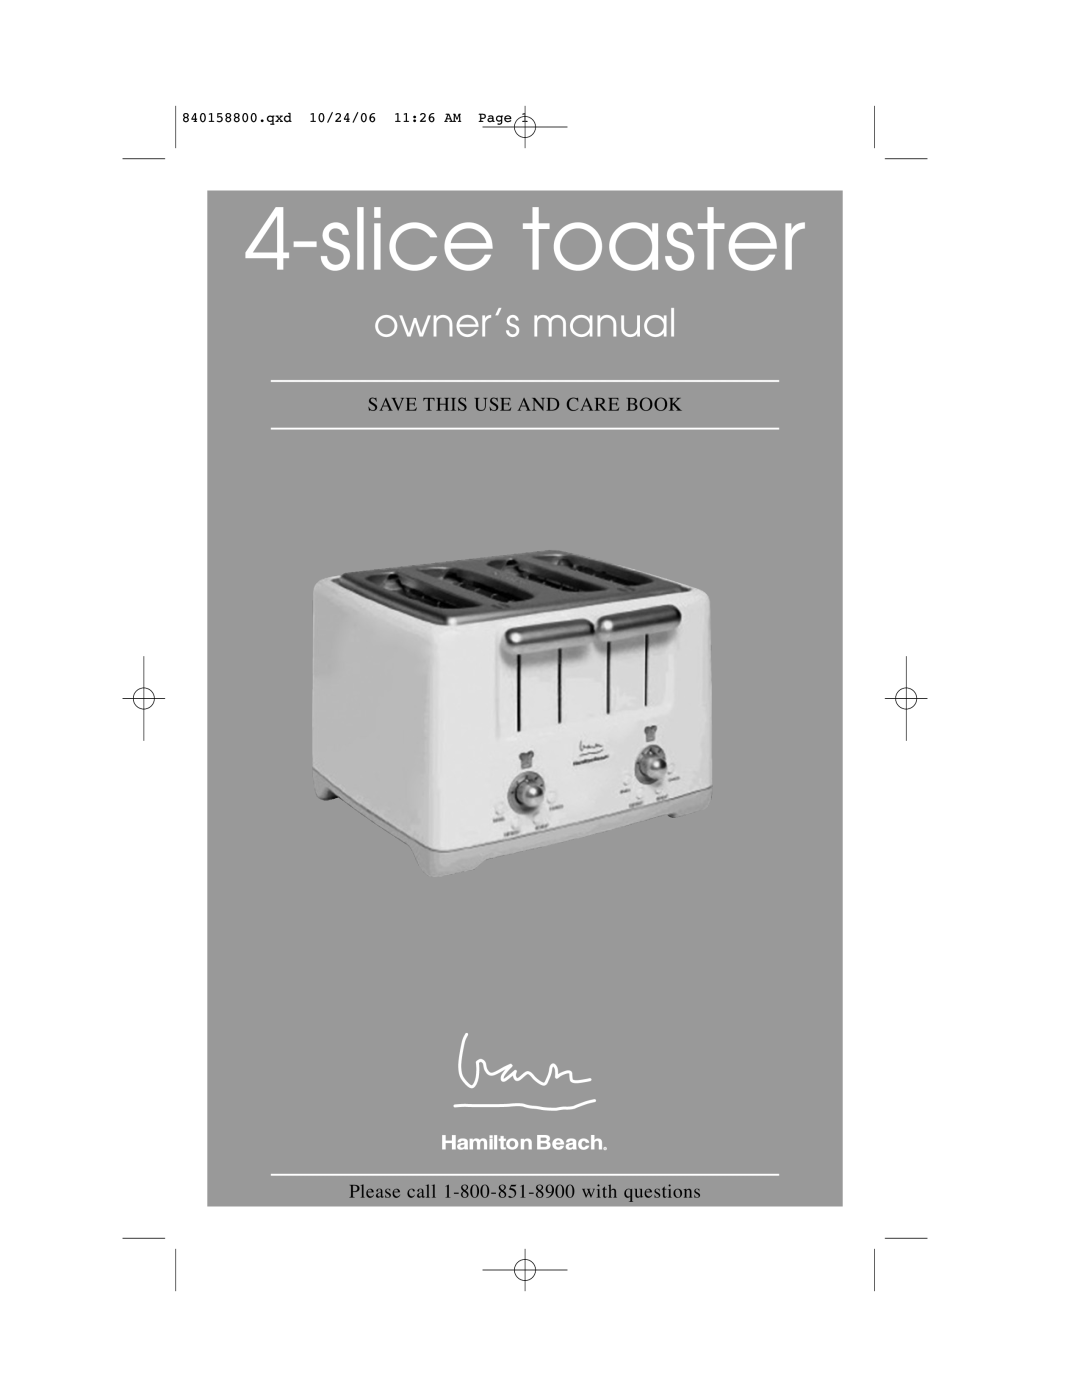 Hamilton Beach 4-slice Toaster owner manual owner’s manual, slicetoaster, Save This Use And Care Book 